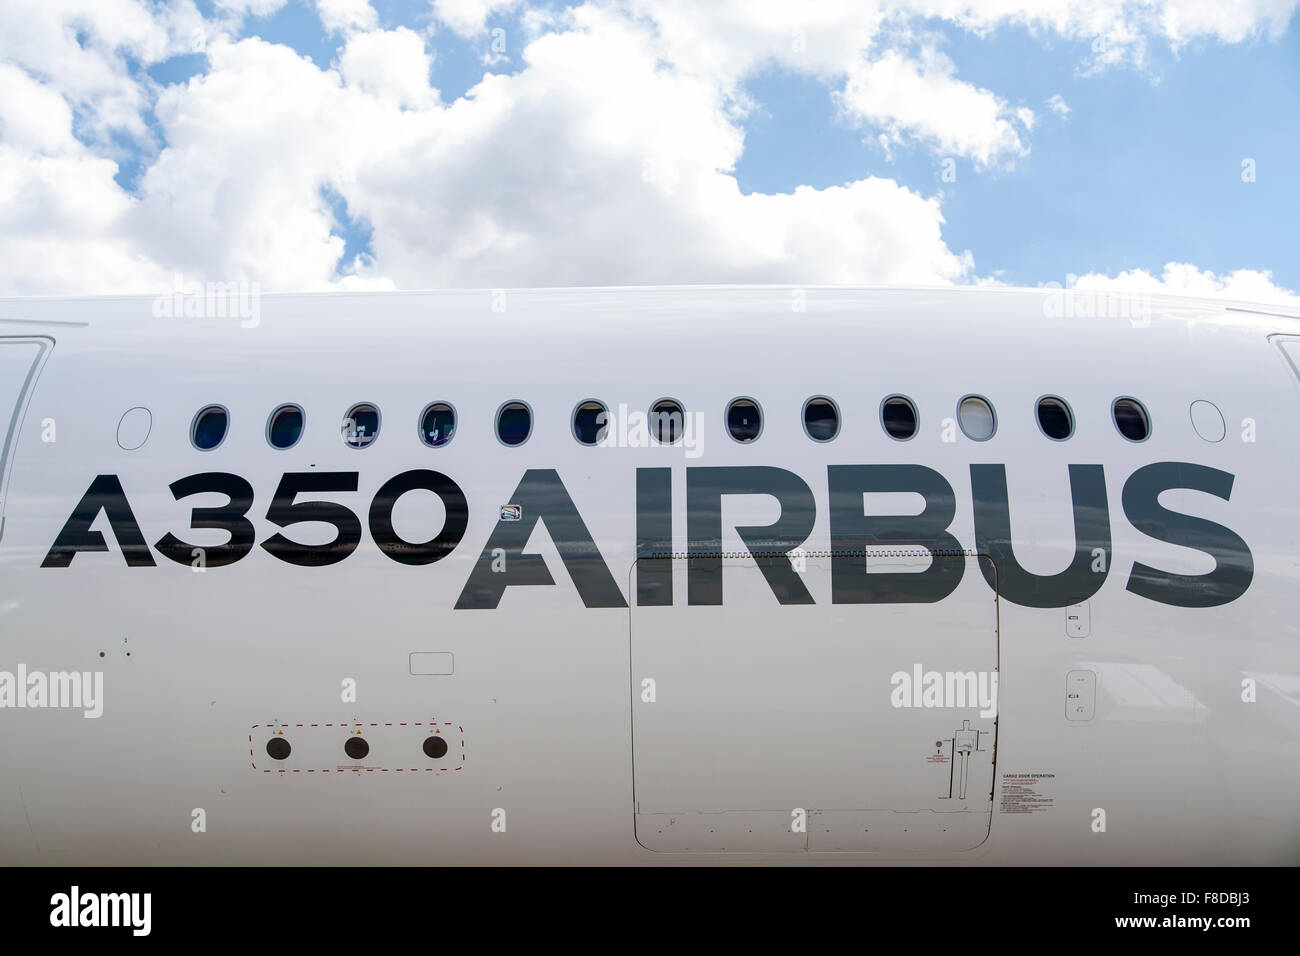 The Airbus A350 XWB test aircraft is a two-engine aircraft is designed to transport more than 300 passengers. Stock Photo